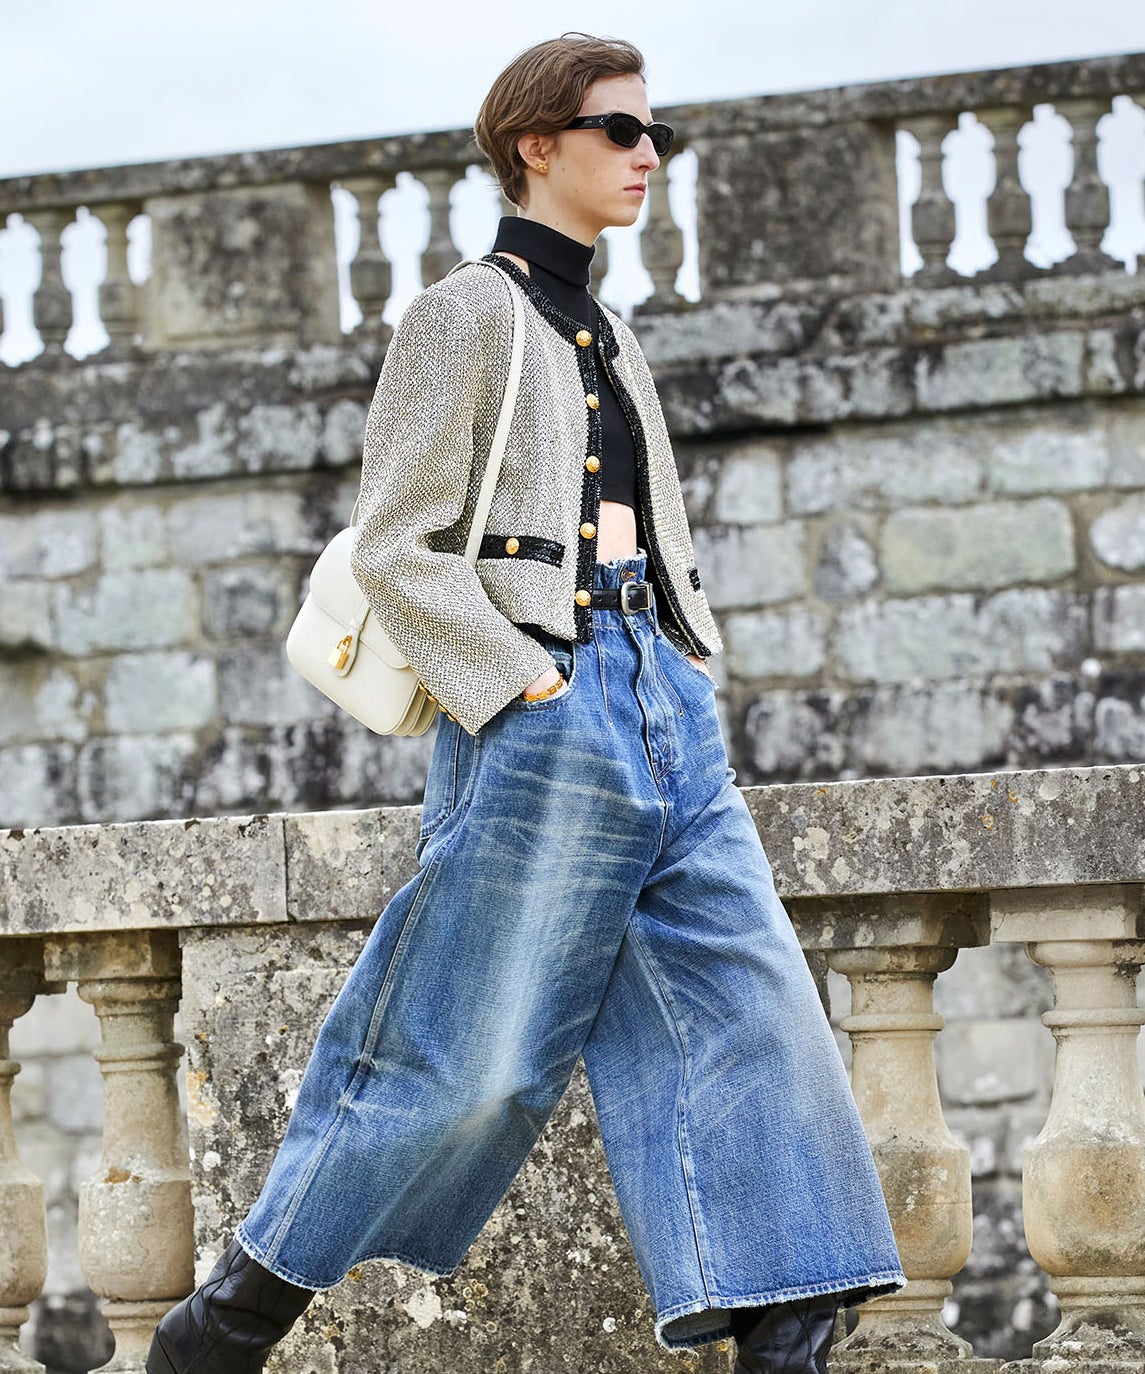 Stylish Winter Outfit: Baggy Jeans x Jacket